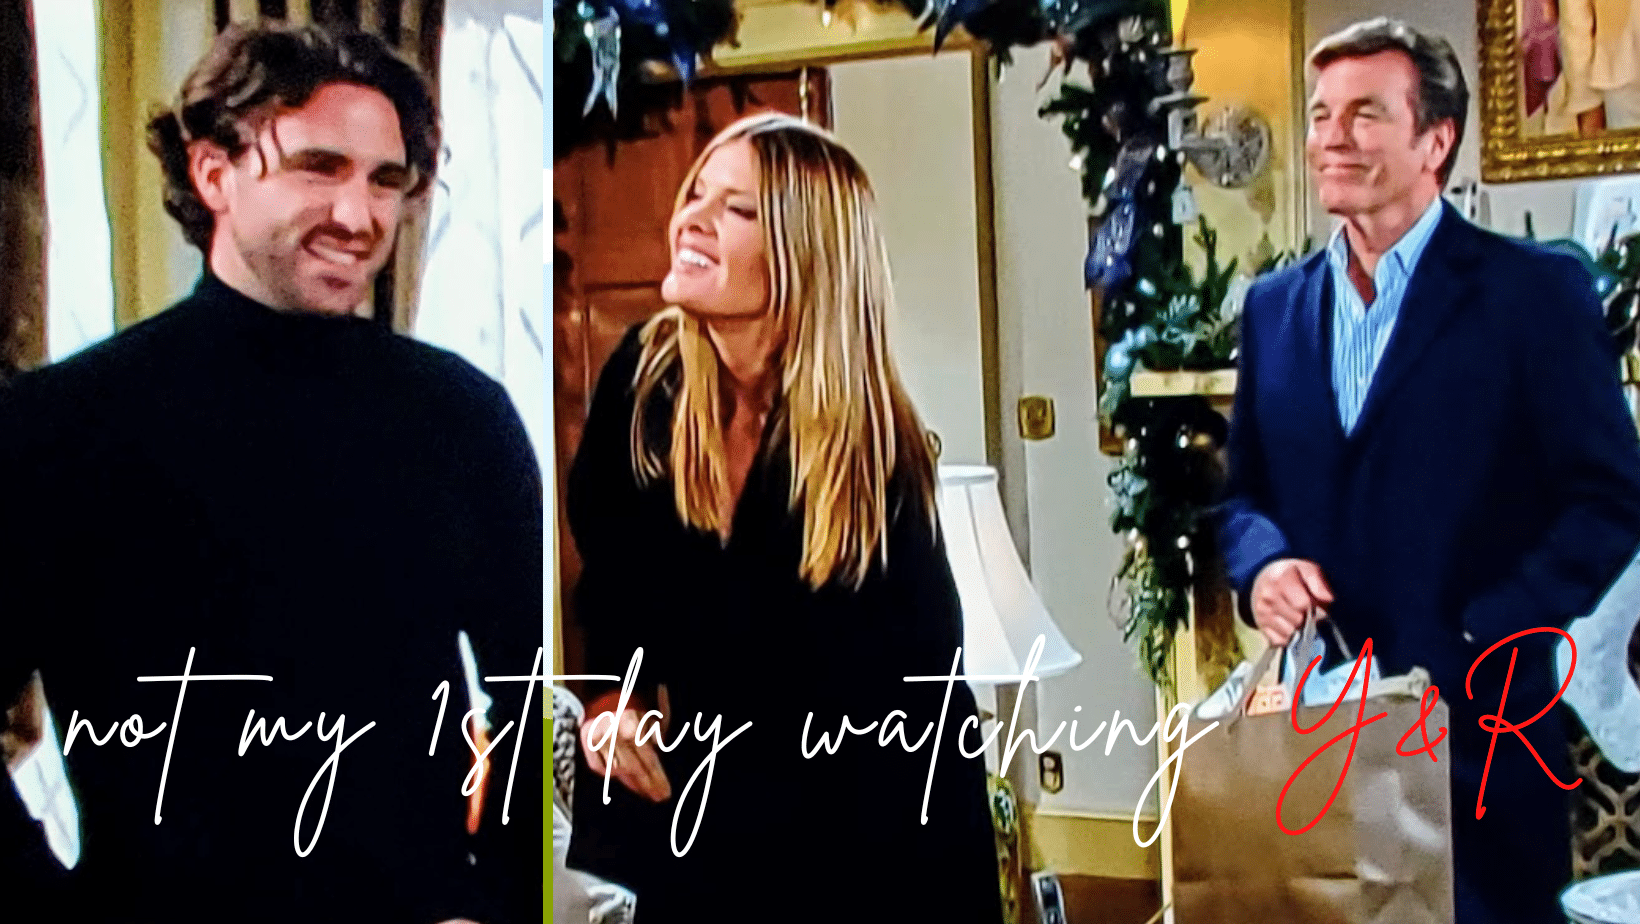 Chance, Phyllis, & Jack on The Young & the Restless, Christmas 2021.